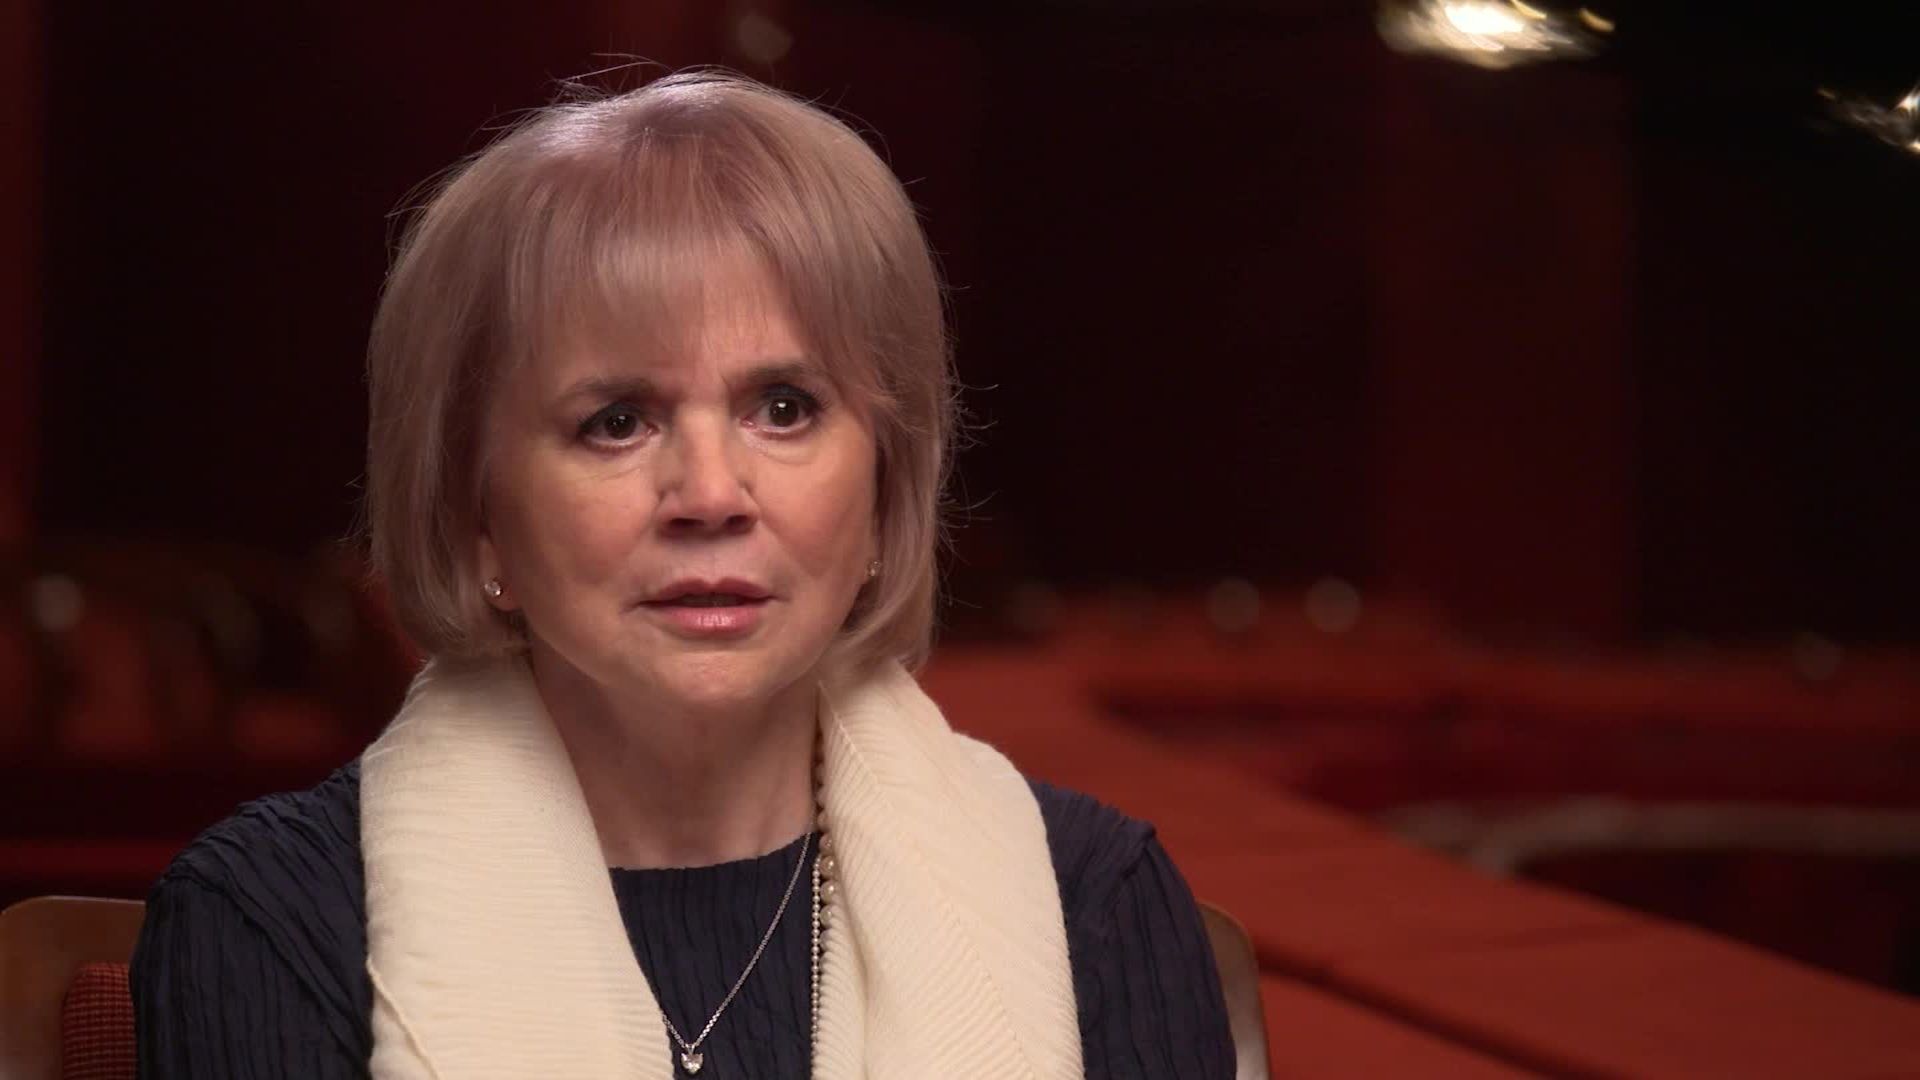 Linda Ronstadt on the rare brain condition that ended her singing career